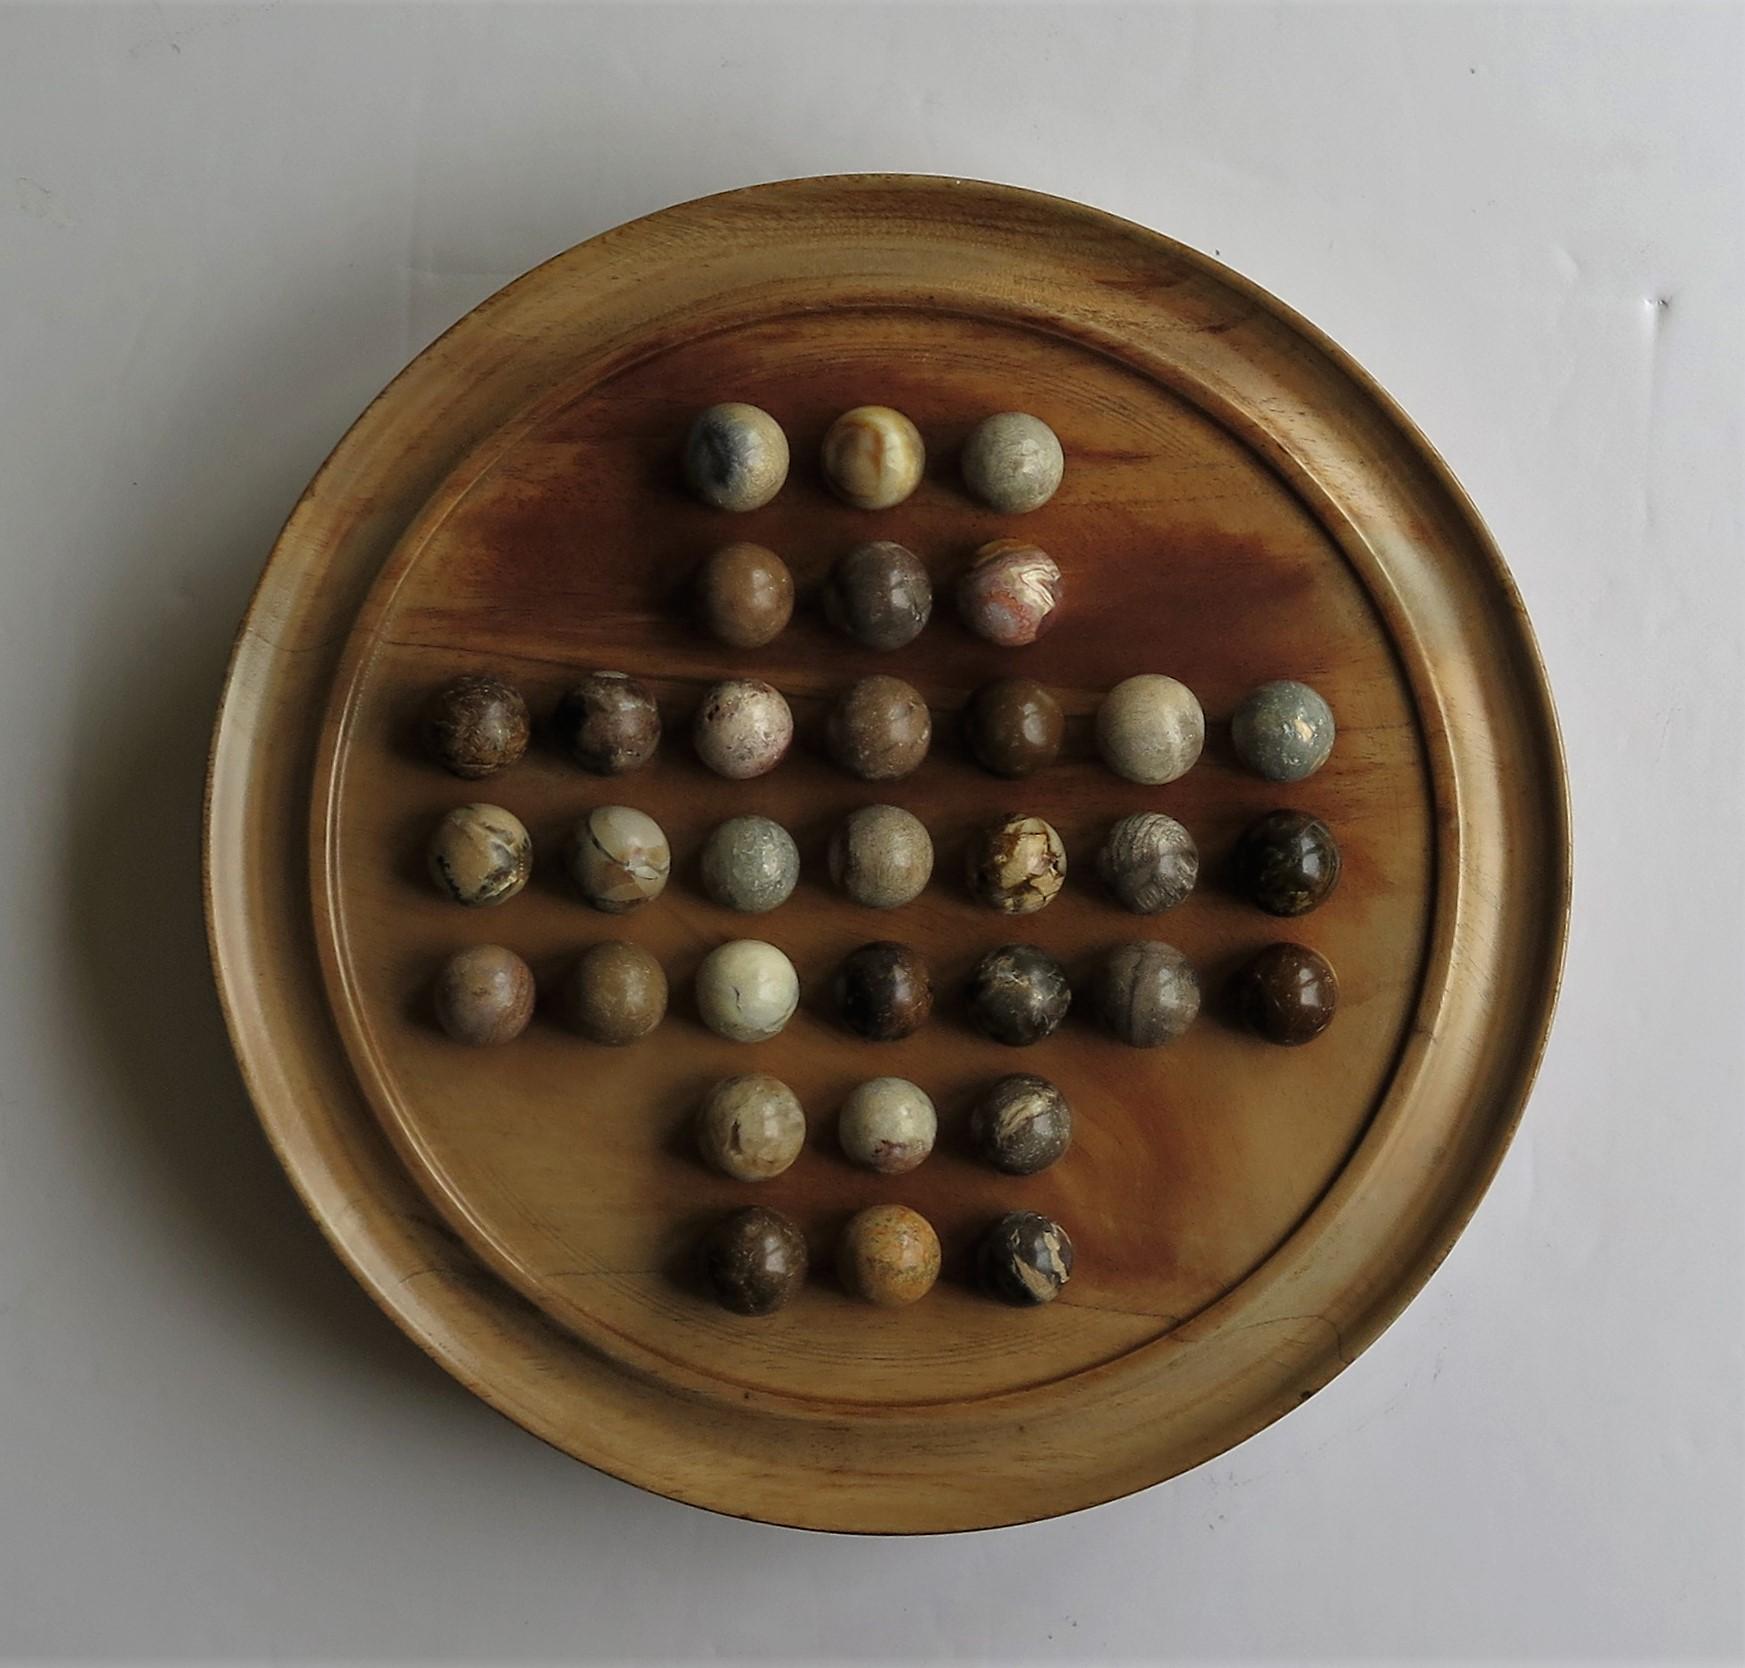 This is a very attractive complete game of Marble Solitaire with a hand turned hardwood board and 33 beautiful agate mineral stone marbles, probably French and all dating to the early 20th century, circa 1920.

The circular hand turned board is